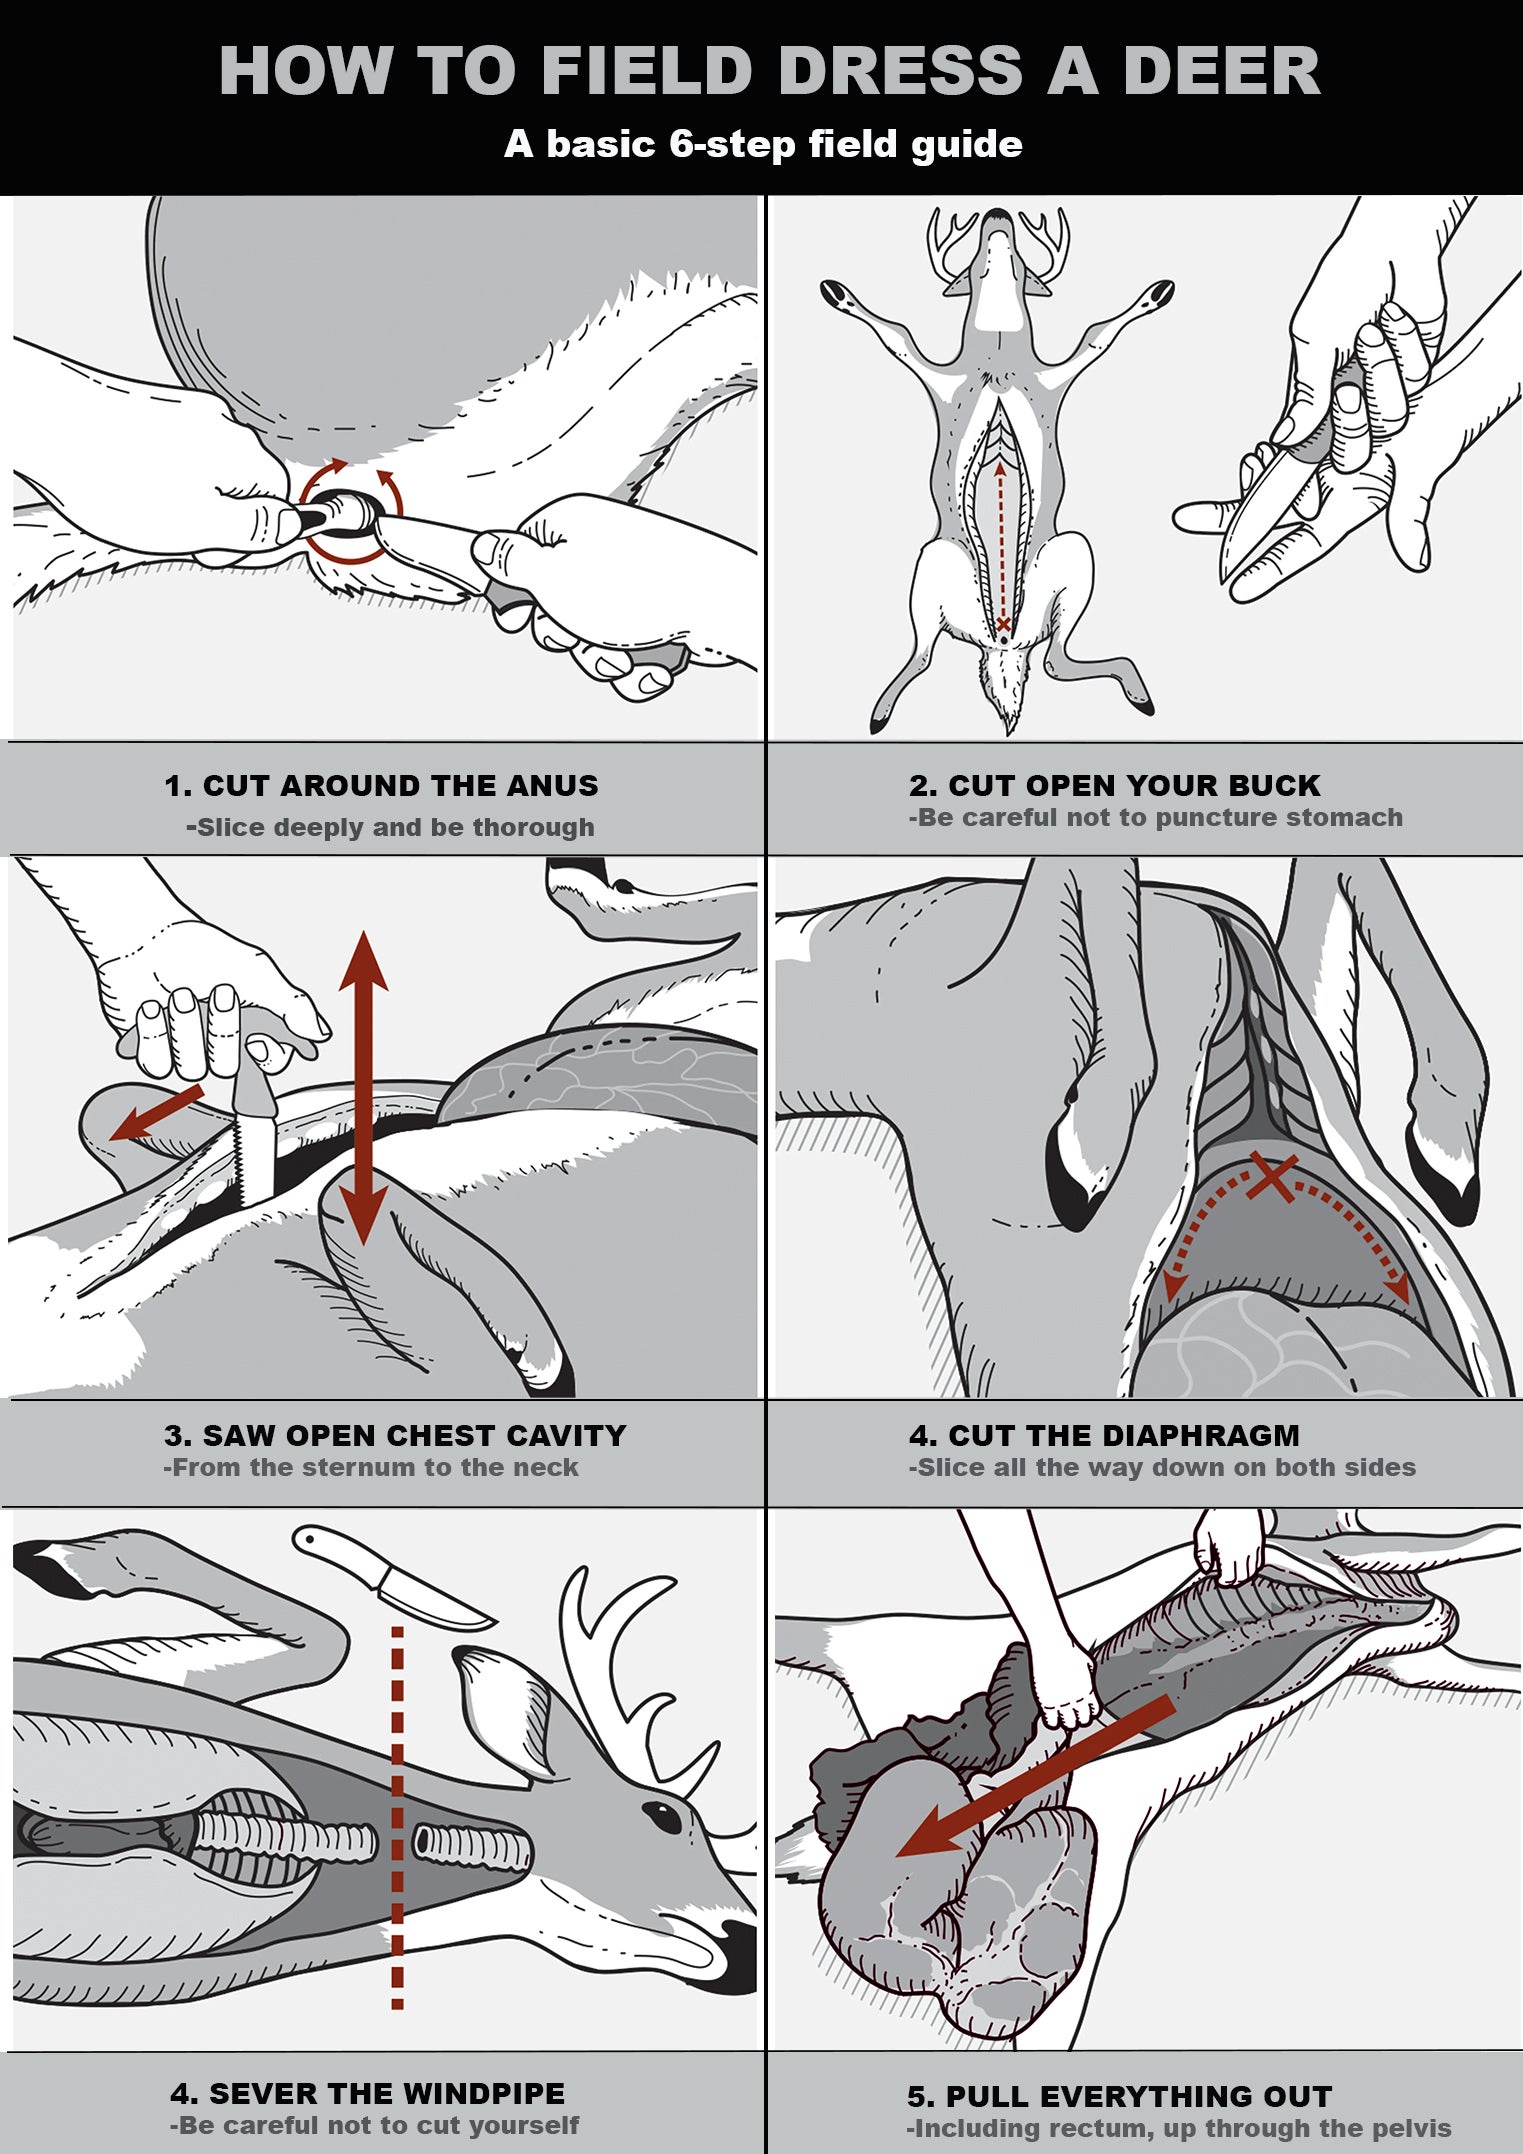 An illustrated field guide on how to field dress a deer, in six steps